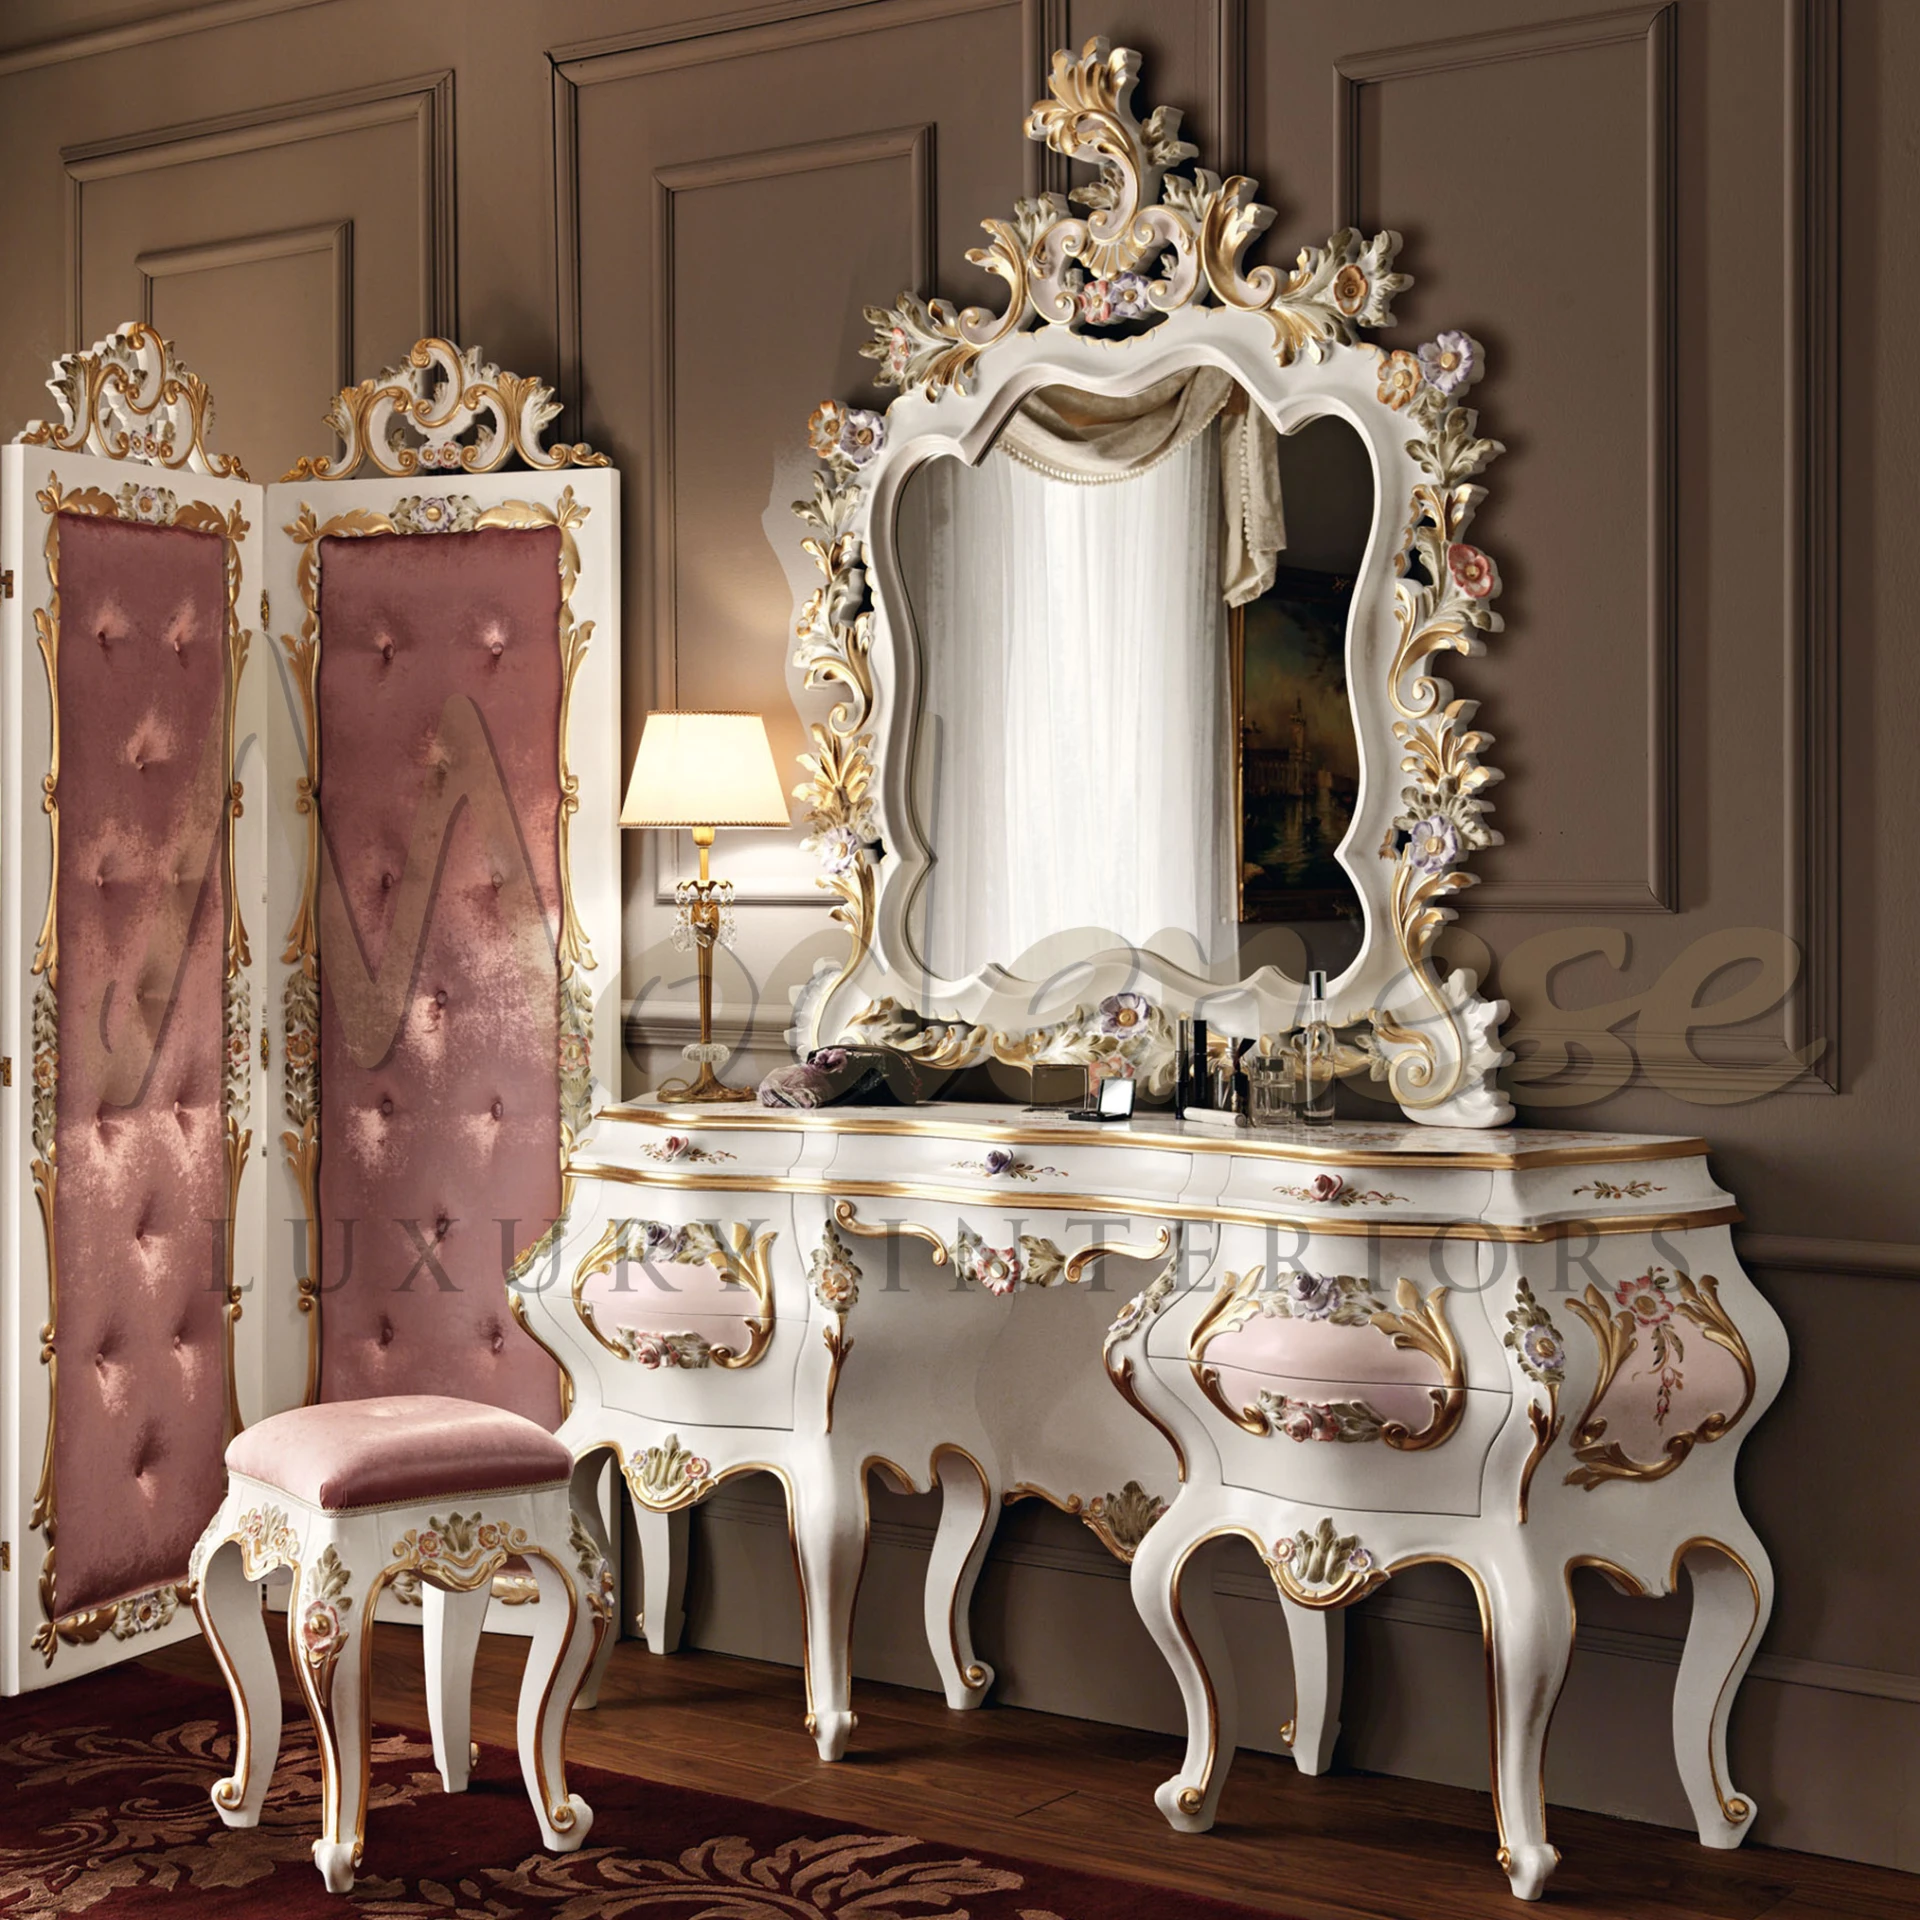 Rococo-style curved dressing table with delicate floral paintings and gilded edges, accompanied by a soft pink stool and various cosmetic items under a warm-hued table lamp.